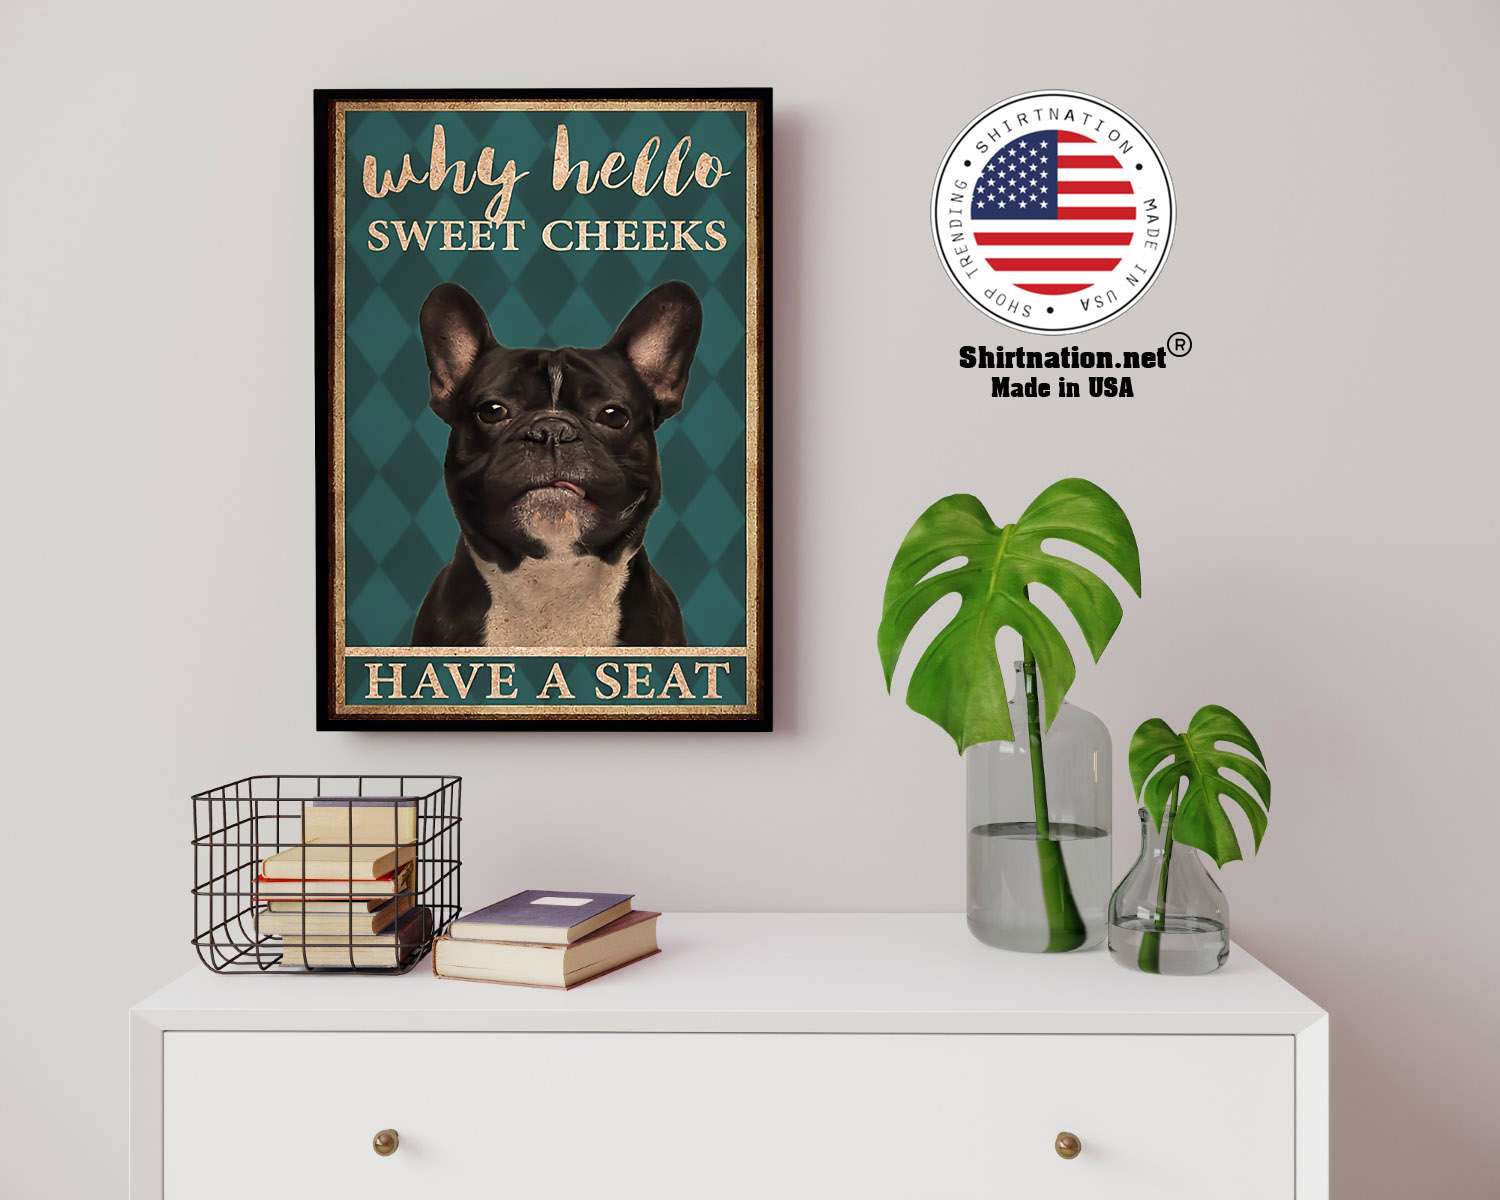 French bulldog why hello sweet cheeks have a seat poster